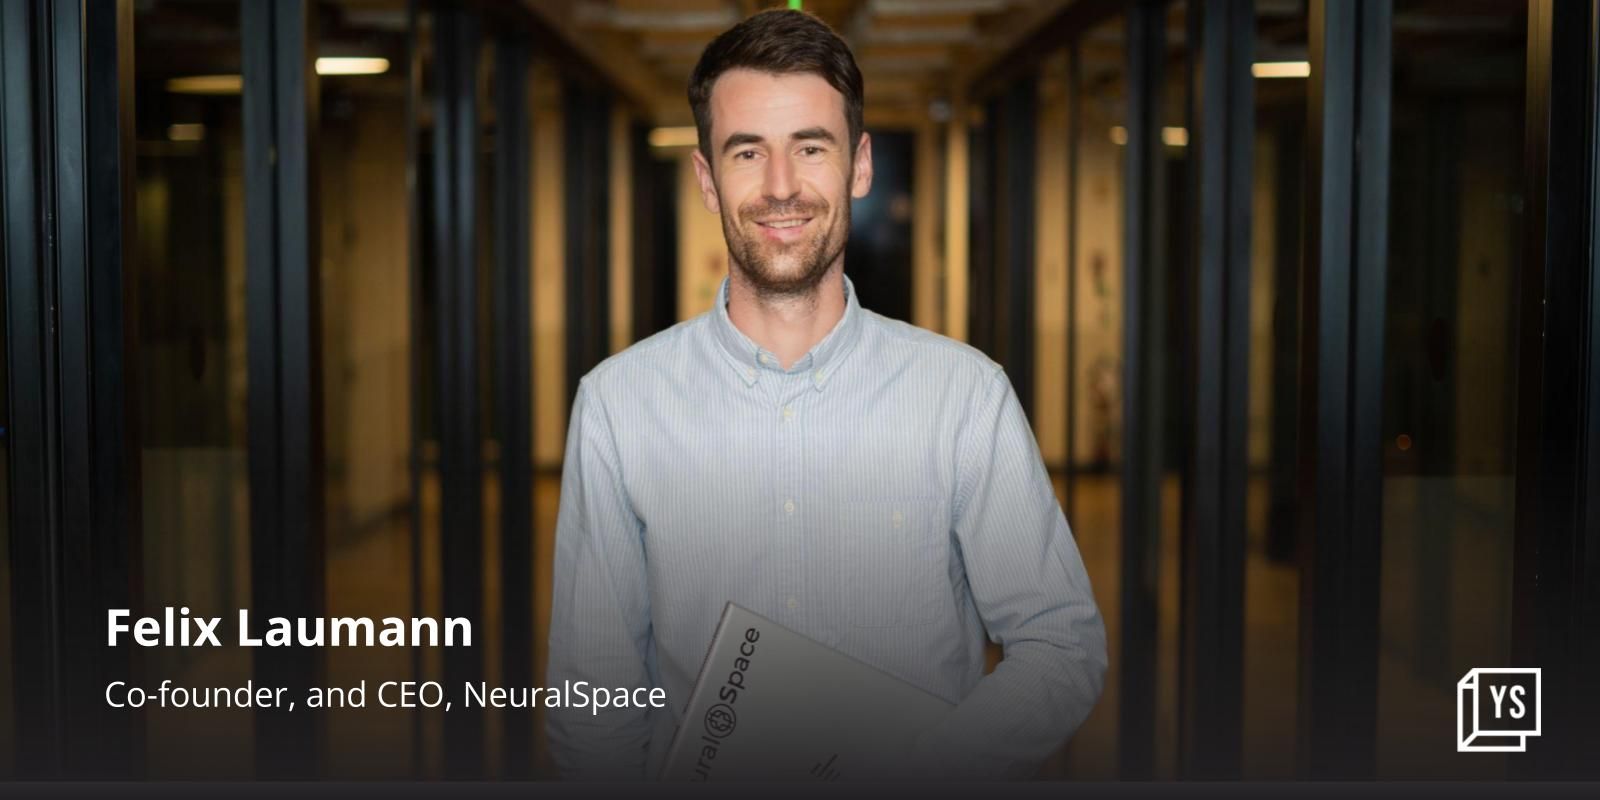 How NeuralSpace helps developers build language AI models in Oriya, German, and many more local languages
